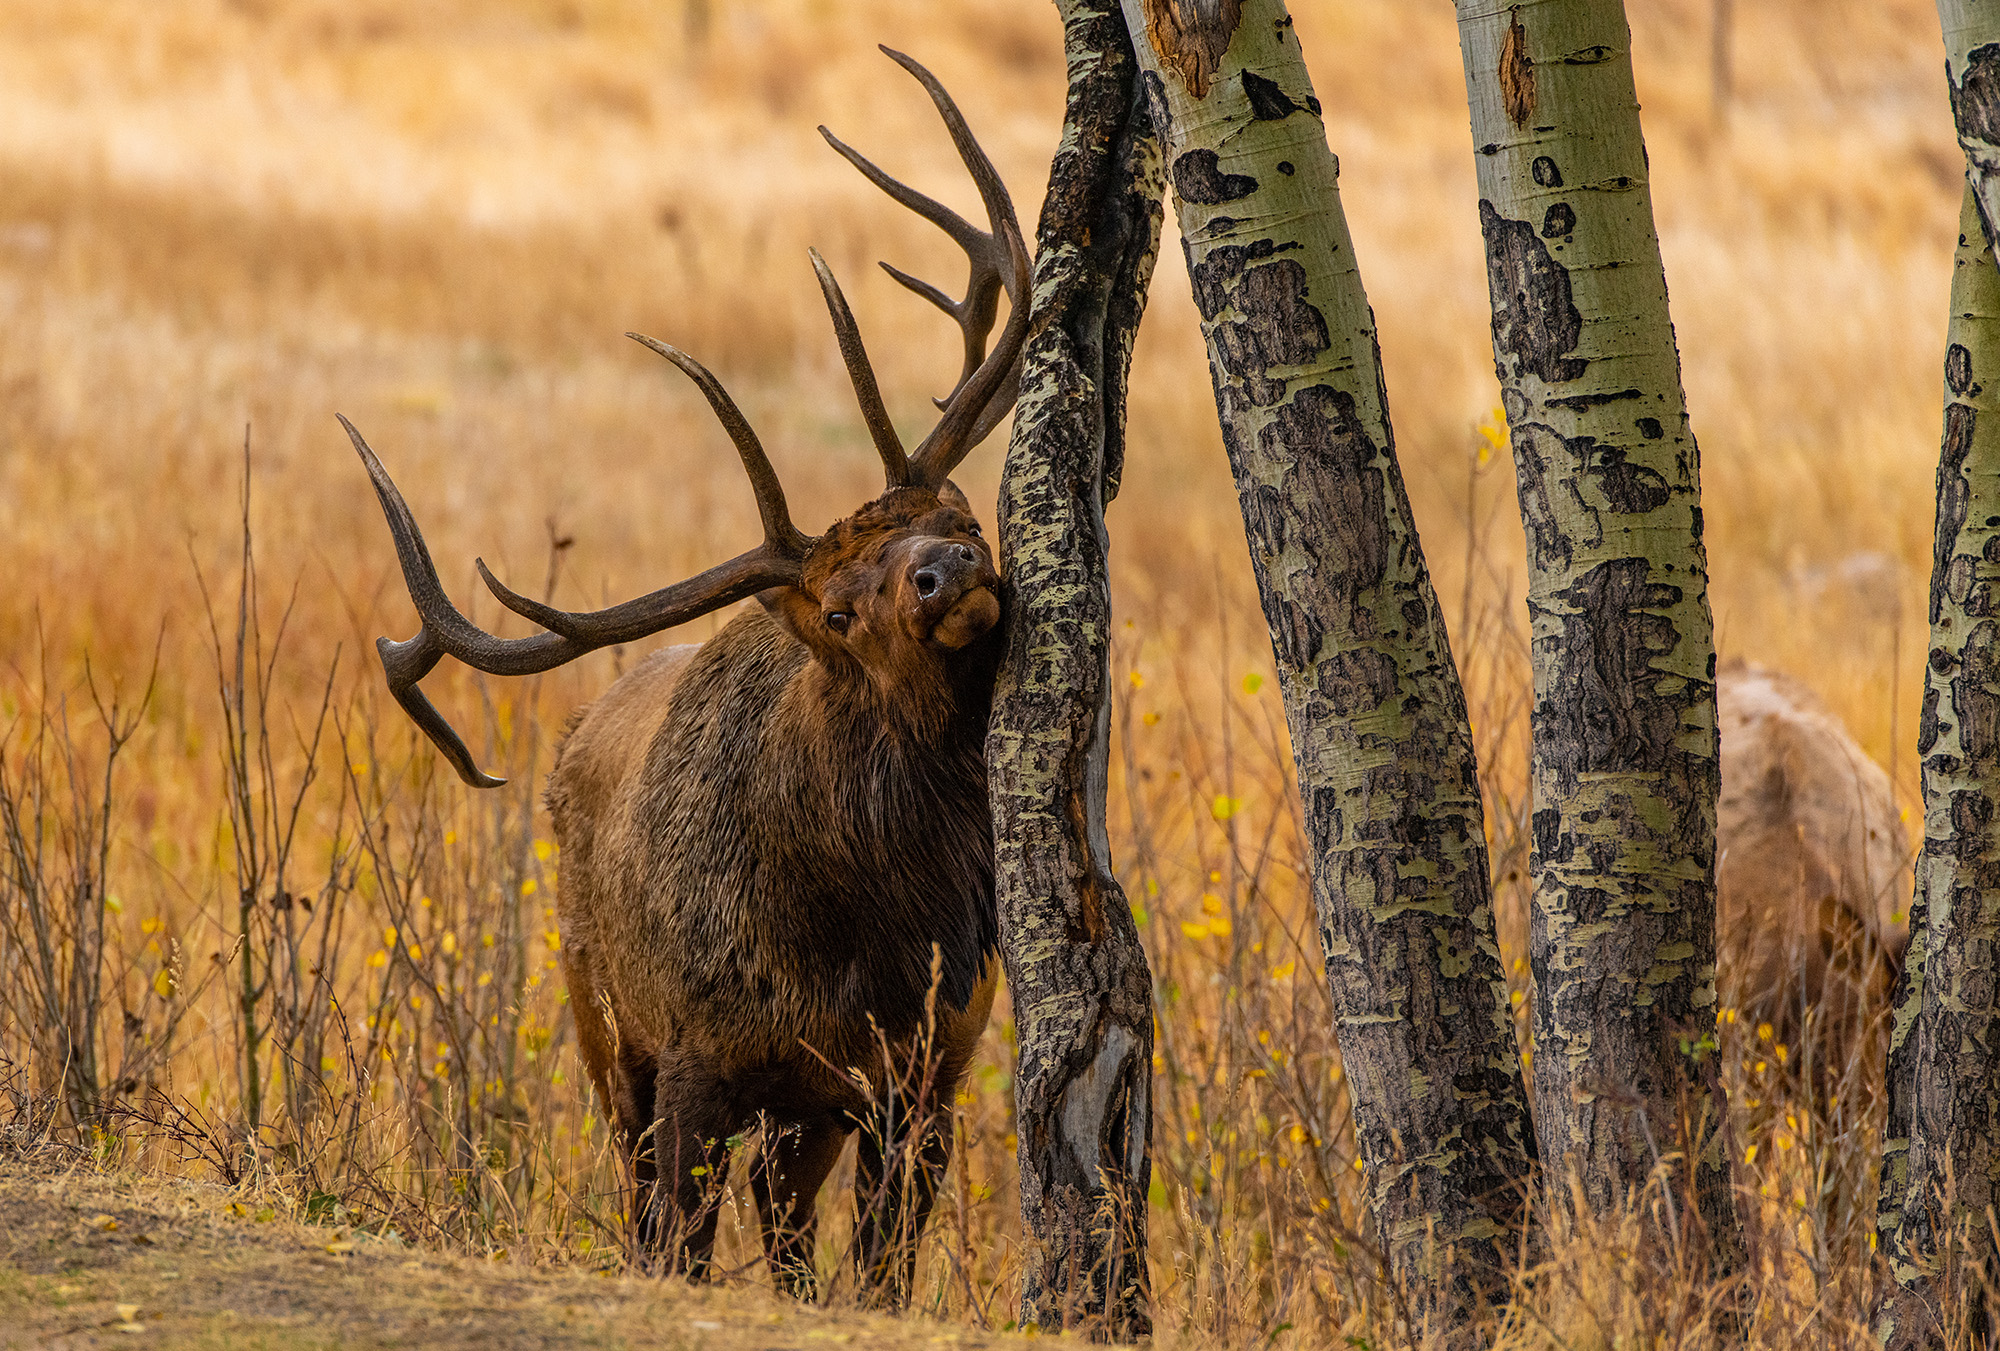 Large Bull Elk scratching on a tree